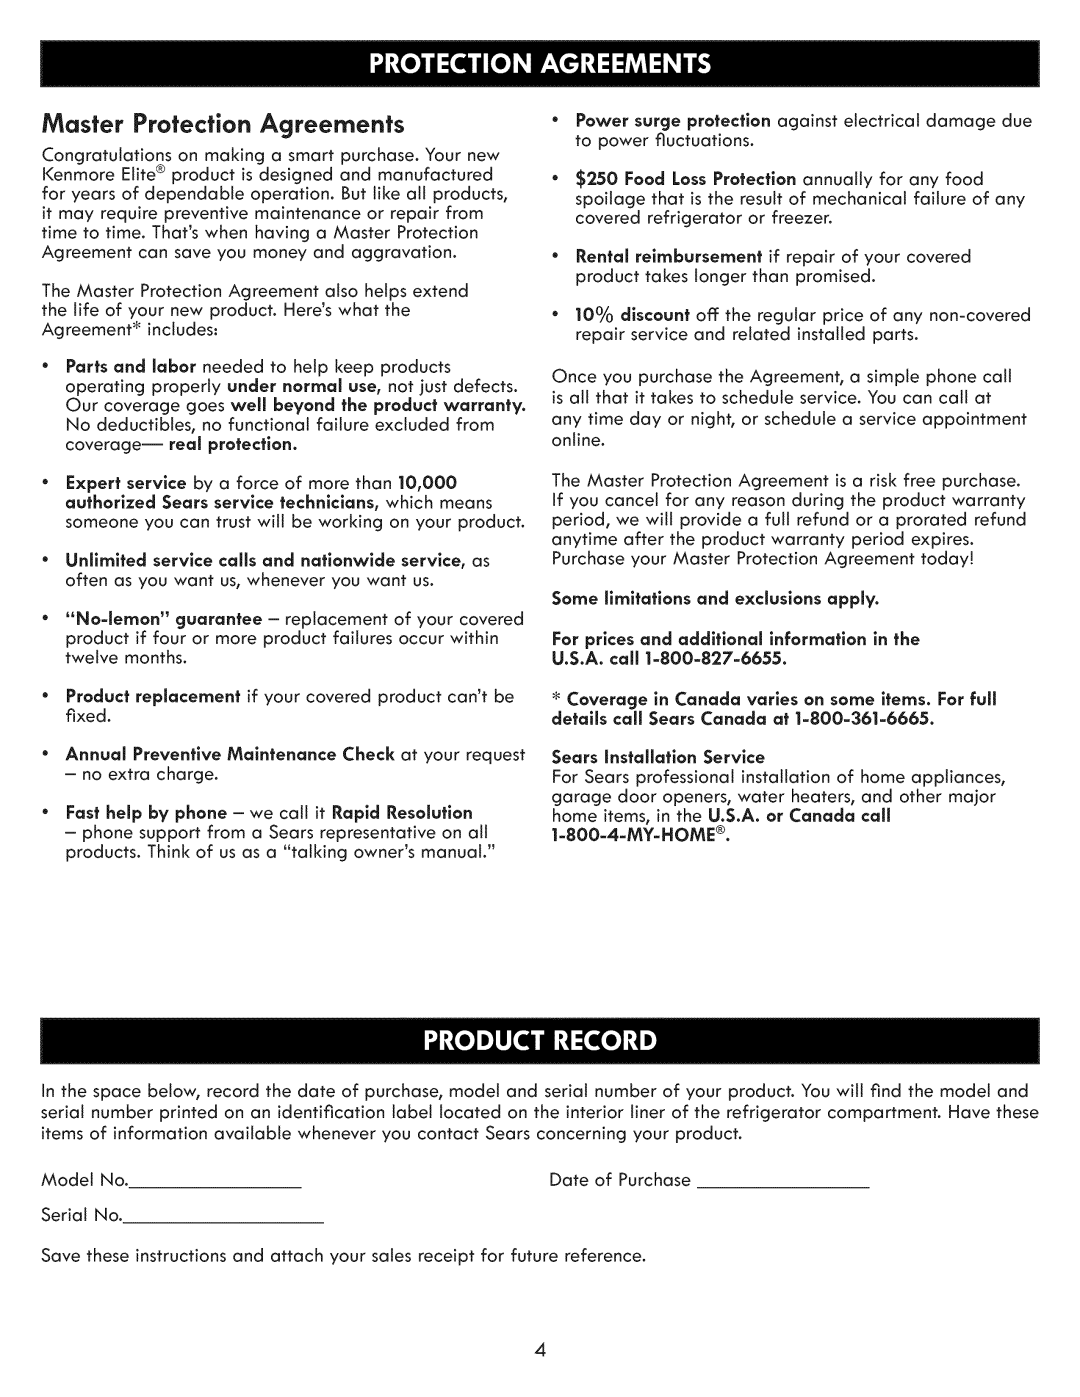 Kenmore 795.7103 manual Master Protection Agreements, Sears Installation Service, My-Home 